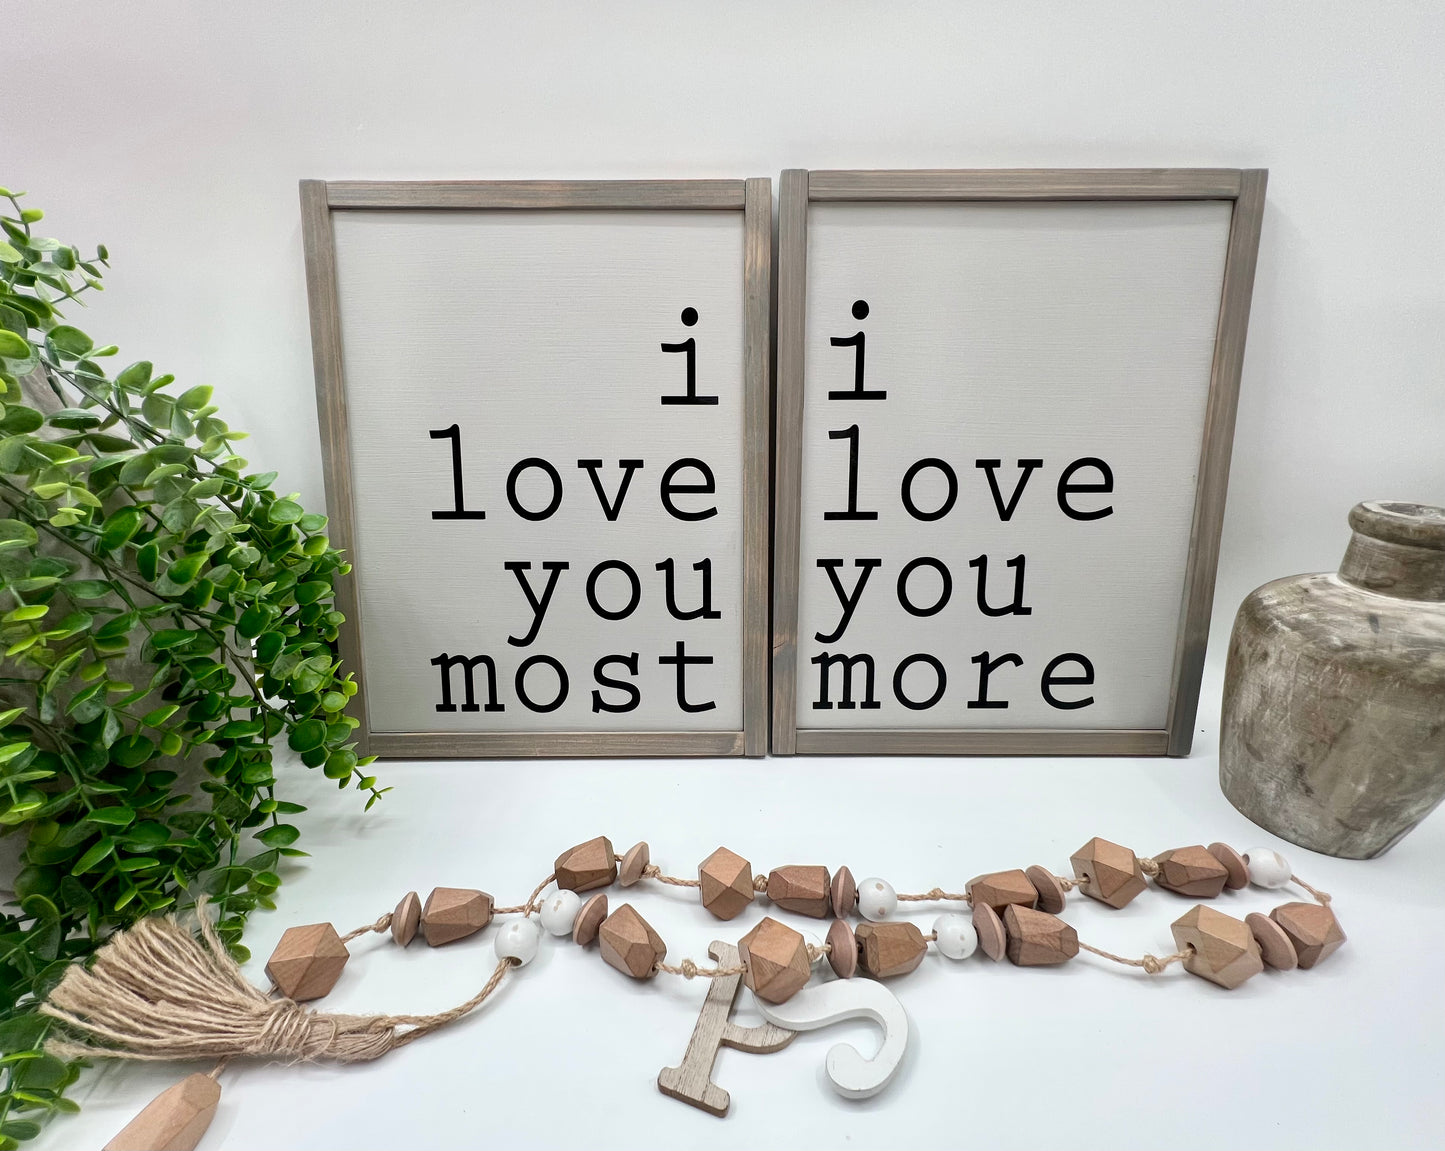 I love You More, I Love You Most - P. Gray/Thick/W. Gray - Wood Sign